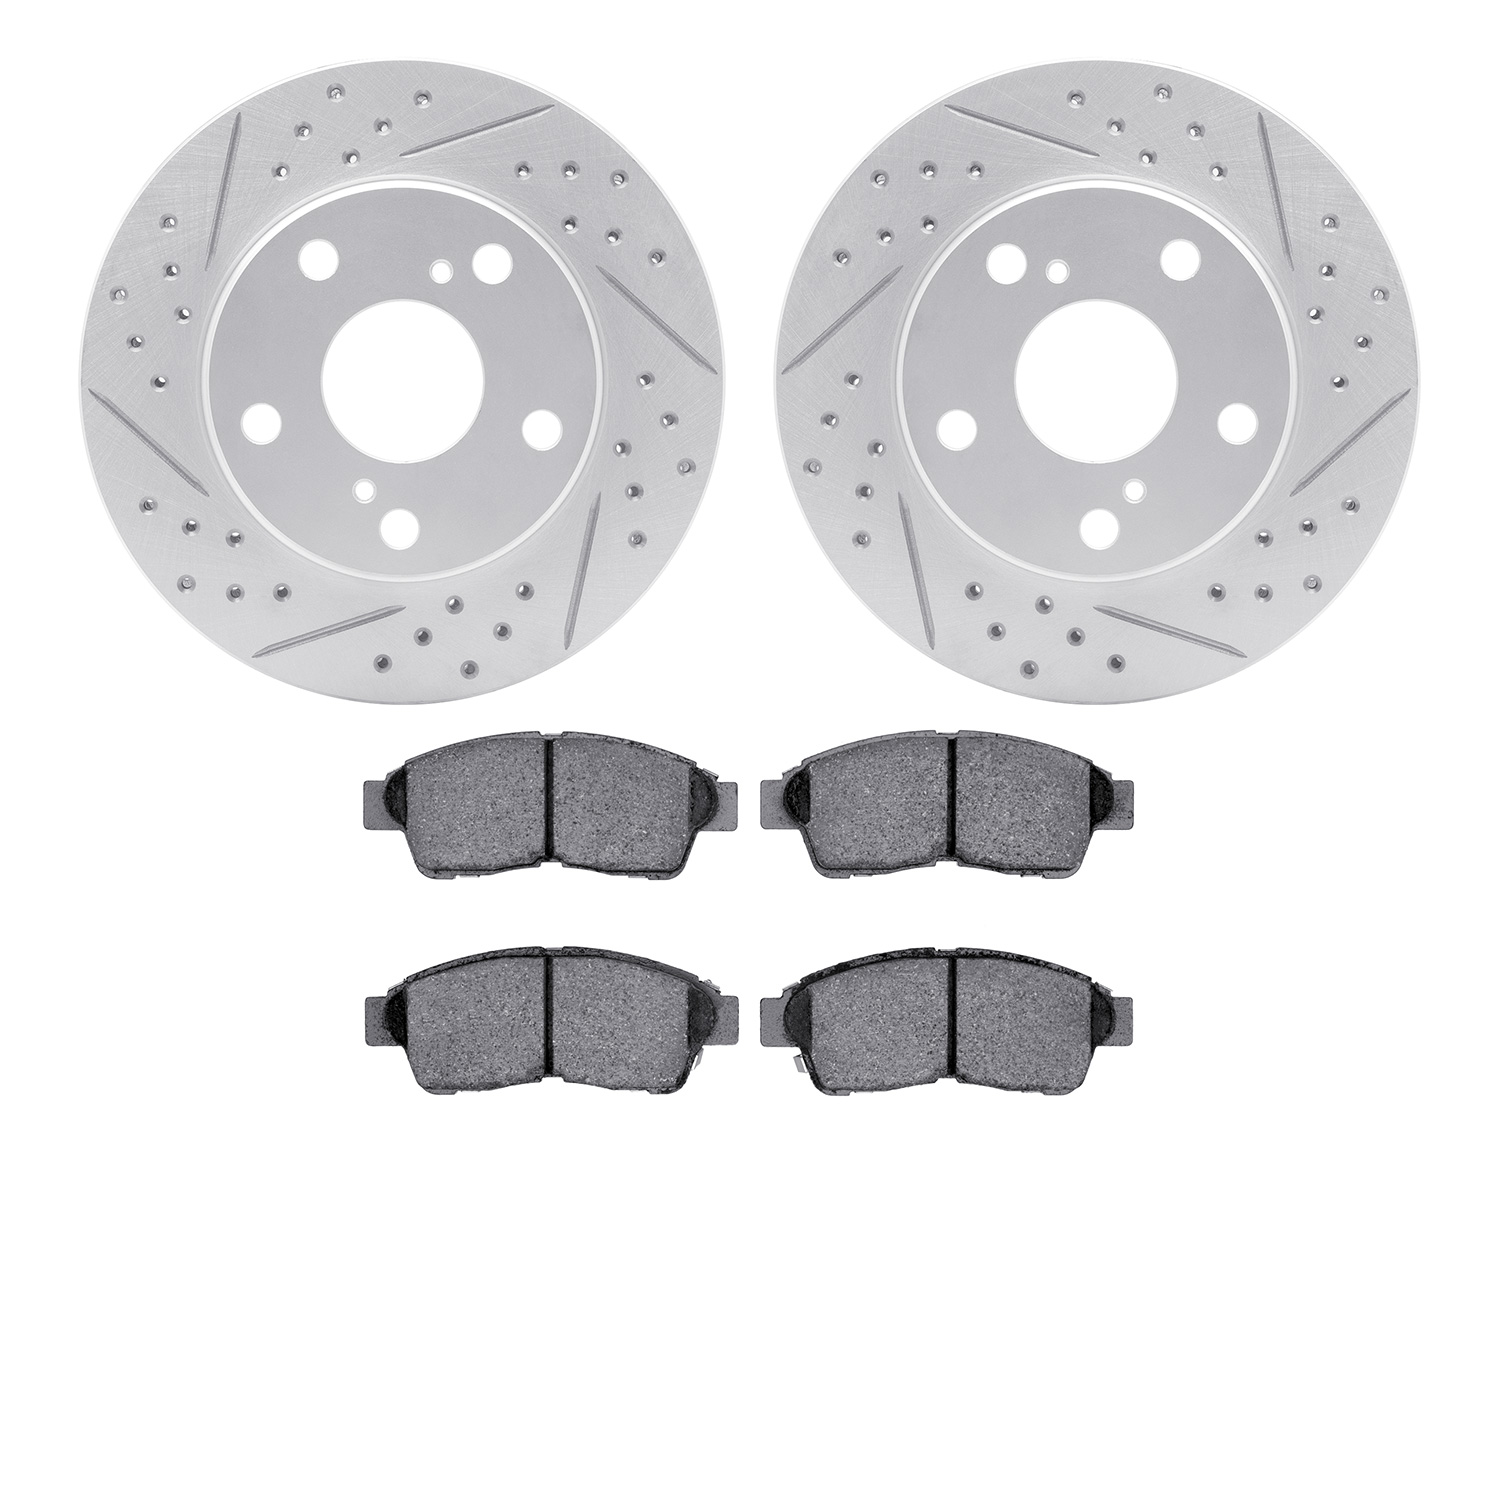 2502-76000 Geoperformance Drilled/Slotted Rotors w/5000 Advanced Brake Pads Kit, 1992-2001 Lexus/Toyota/Scion, Position: Front